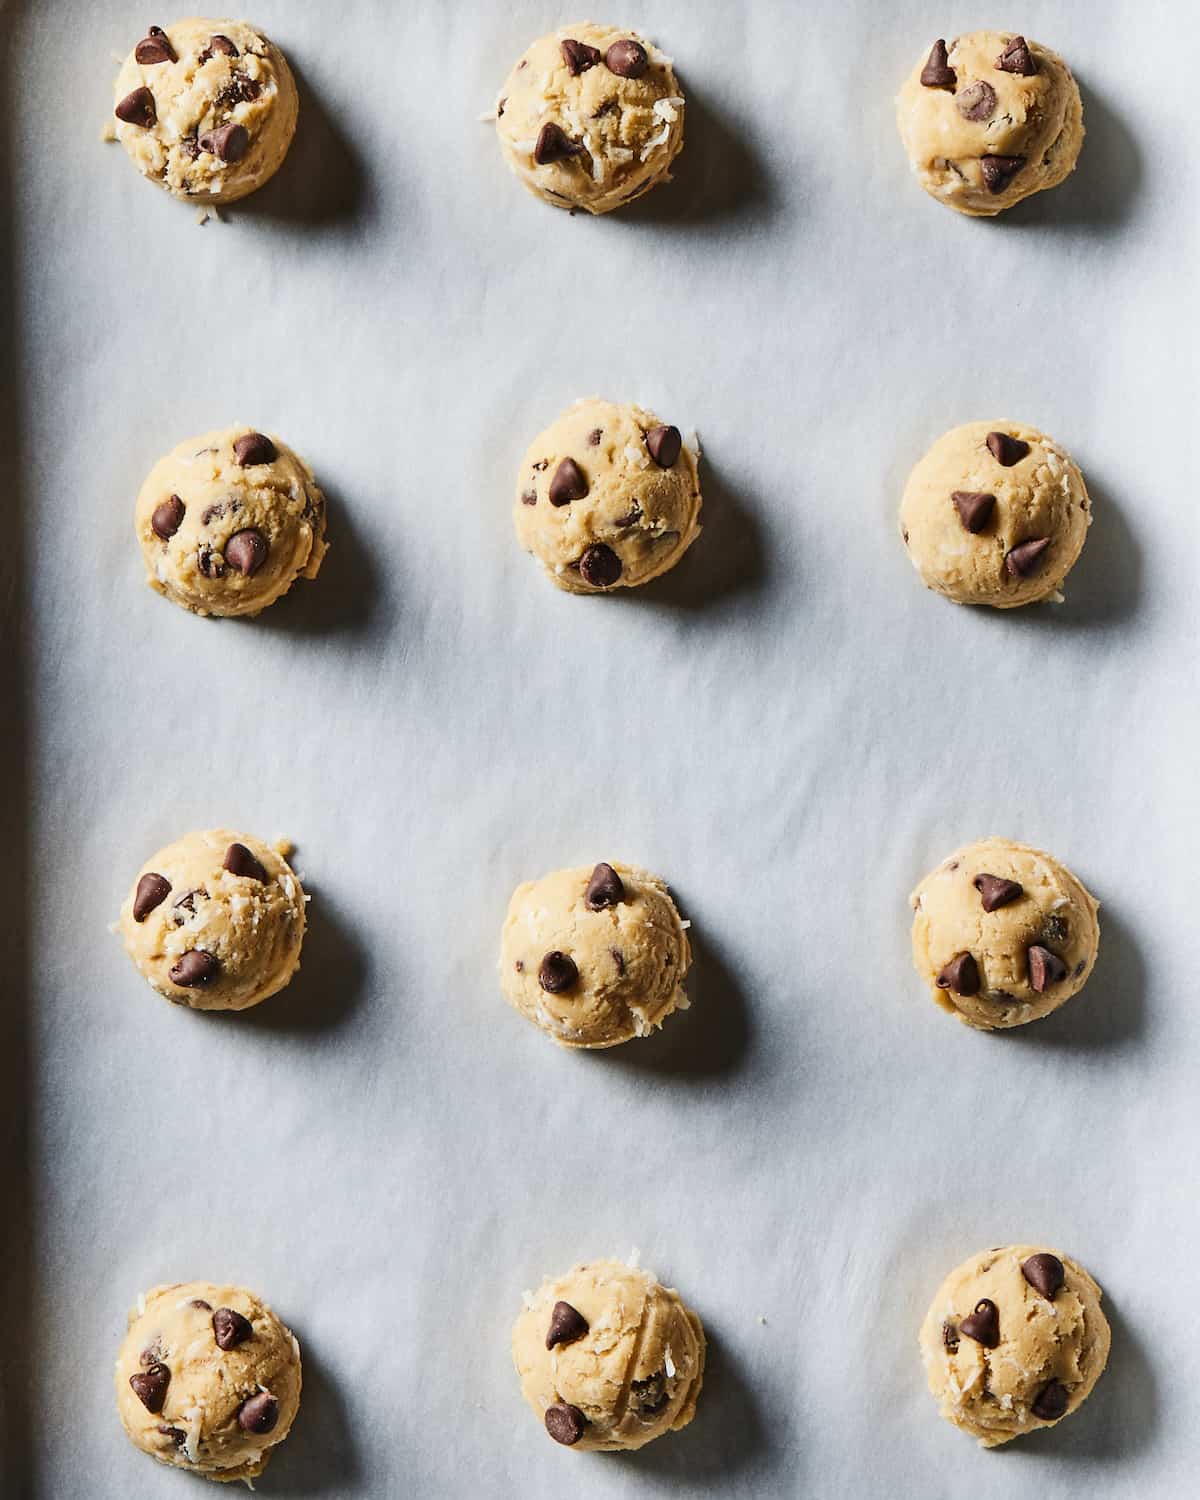 Coconut Chocolate Chip Cookies from www.whatsgabycooking.com (@whatsgabycookin)